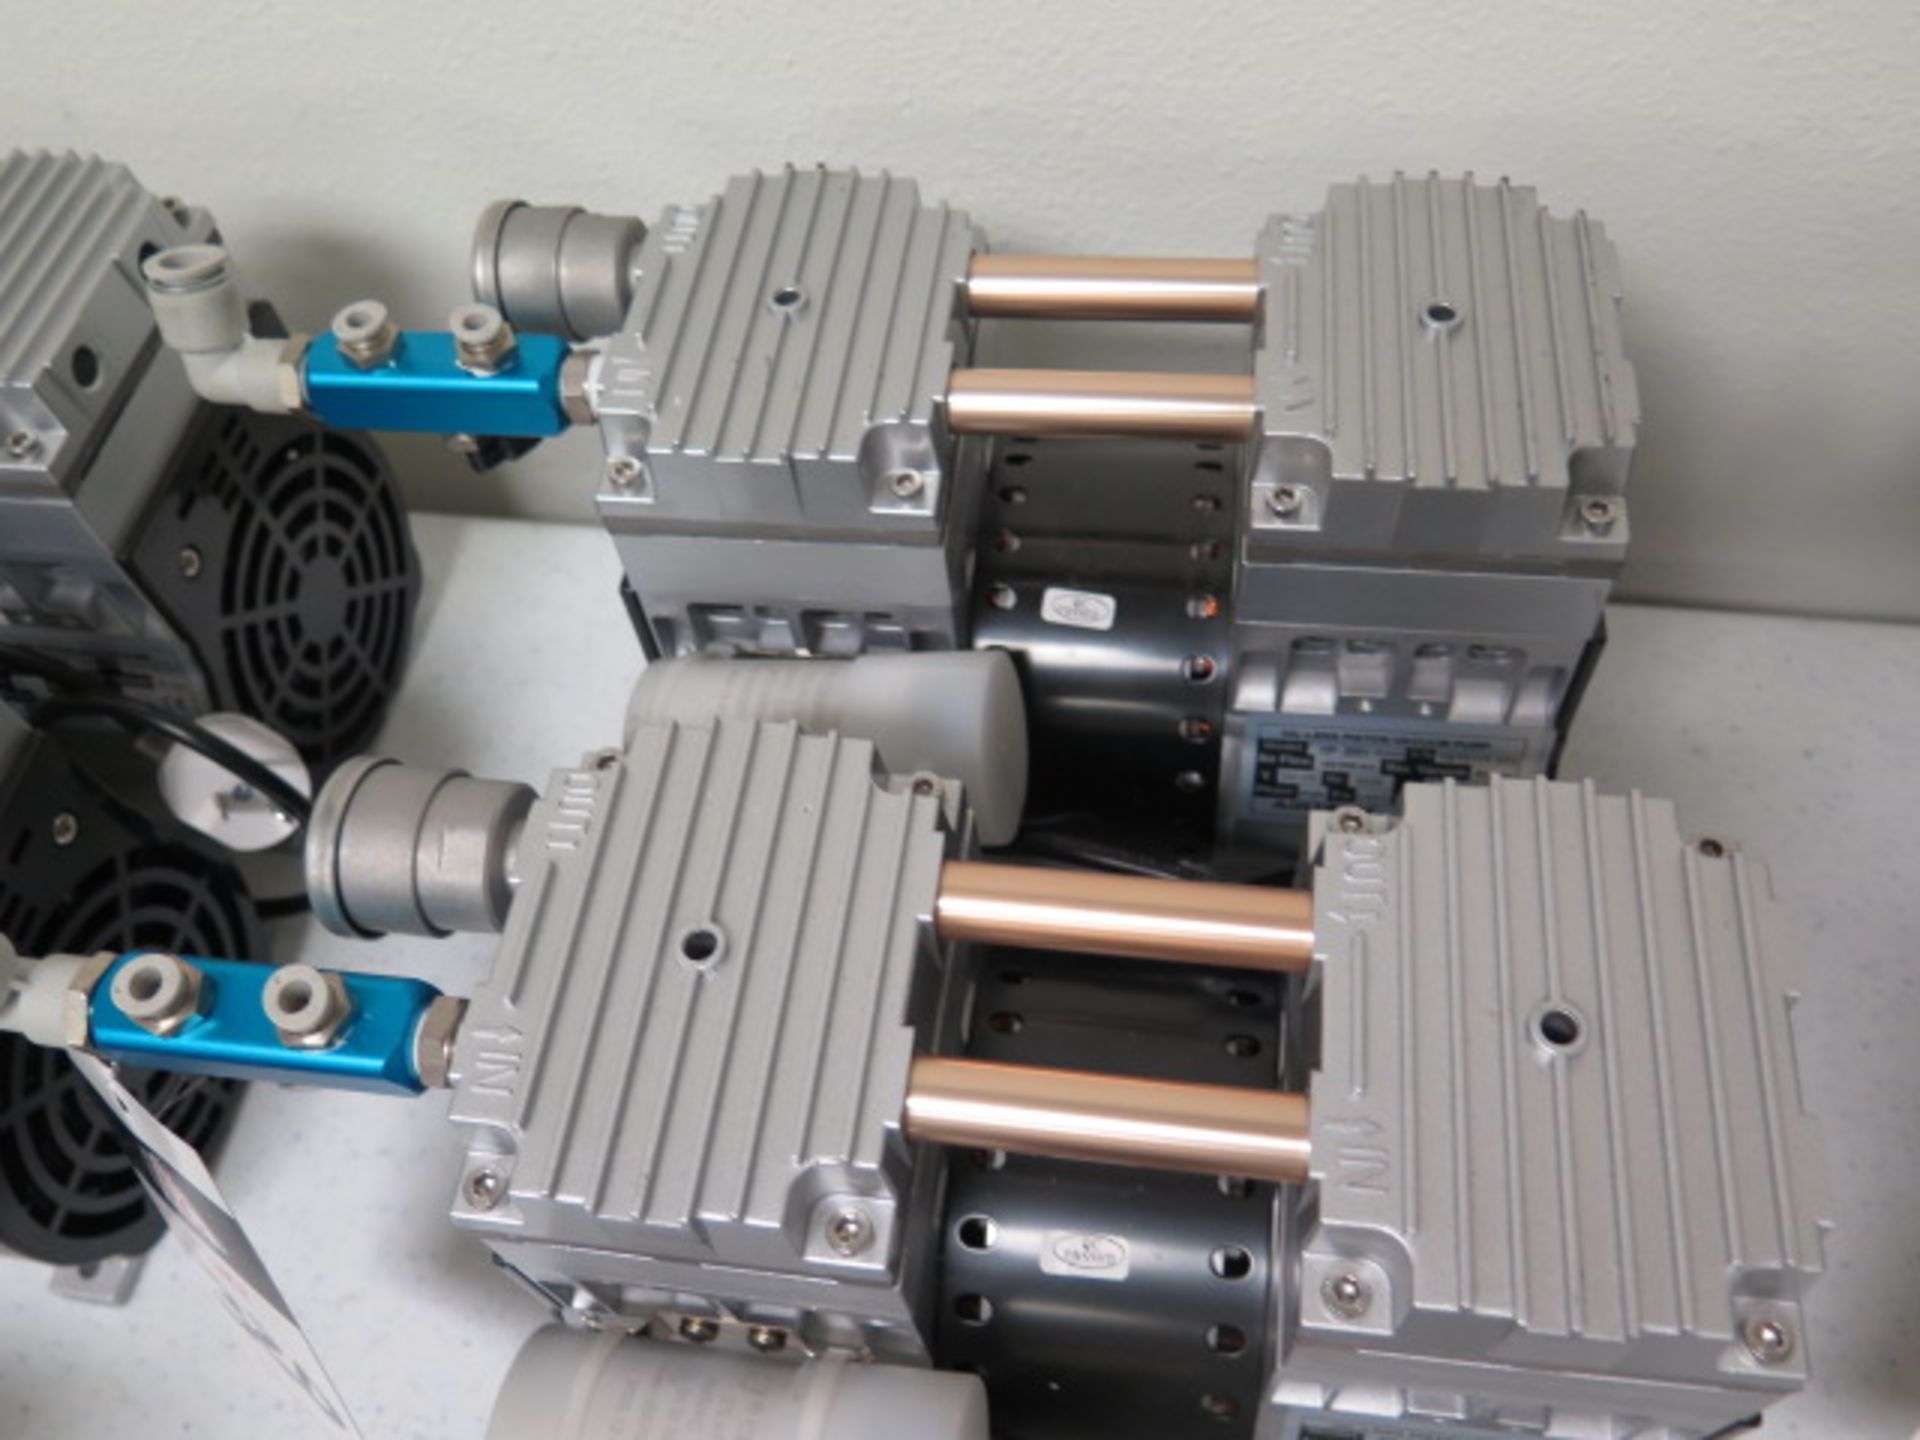 Airtech HP-200V 80 torr Vacuum Pumps (2) 200-240V (SOLD AS-IS - NO WARRANTY) - Image 3 of 5